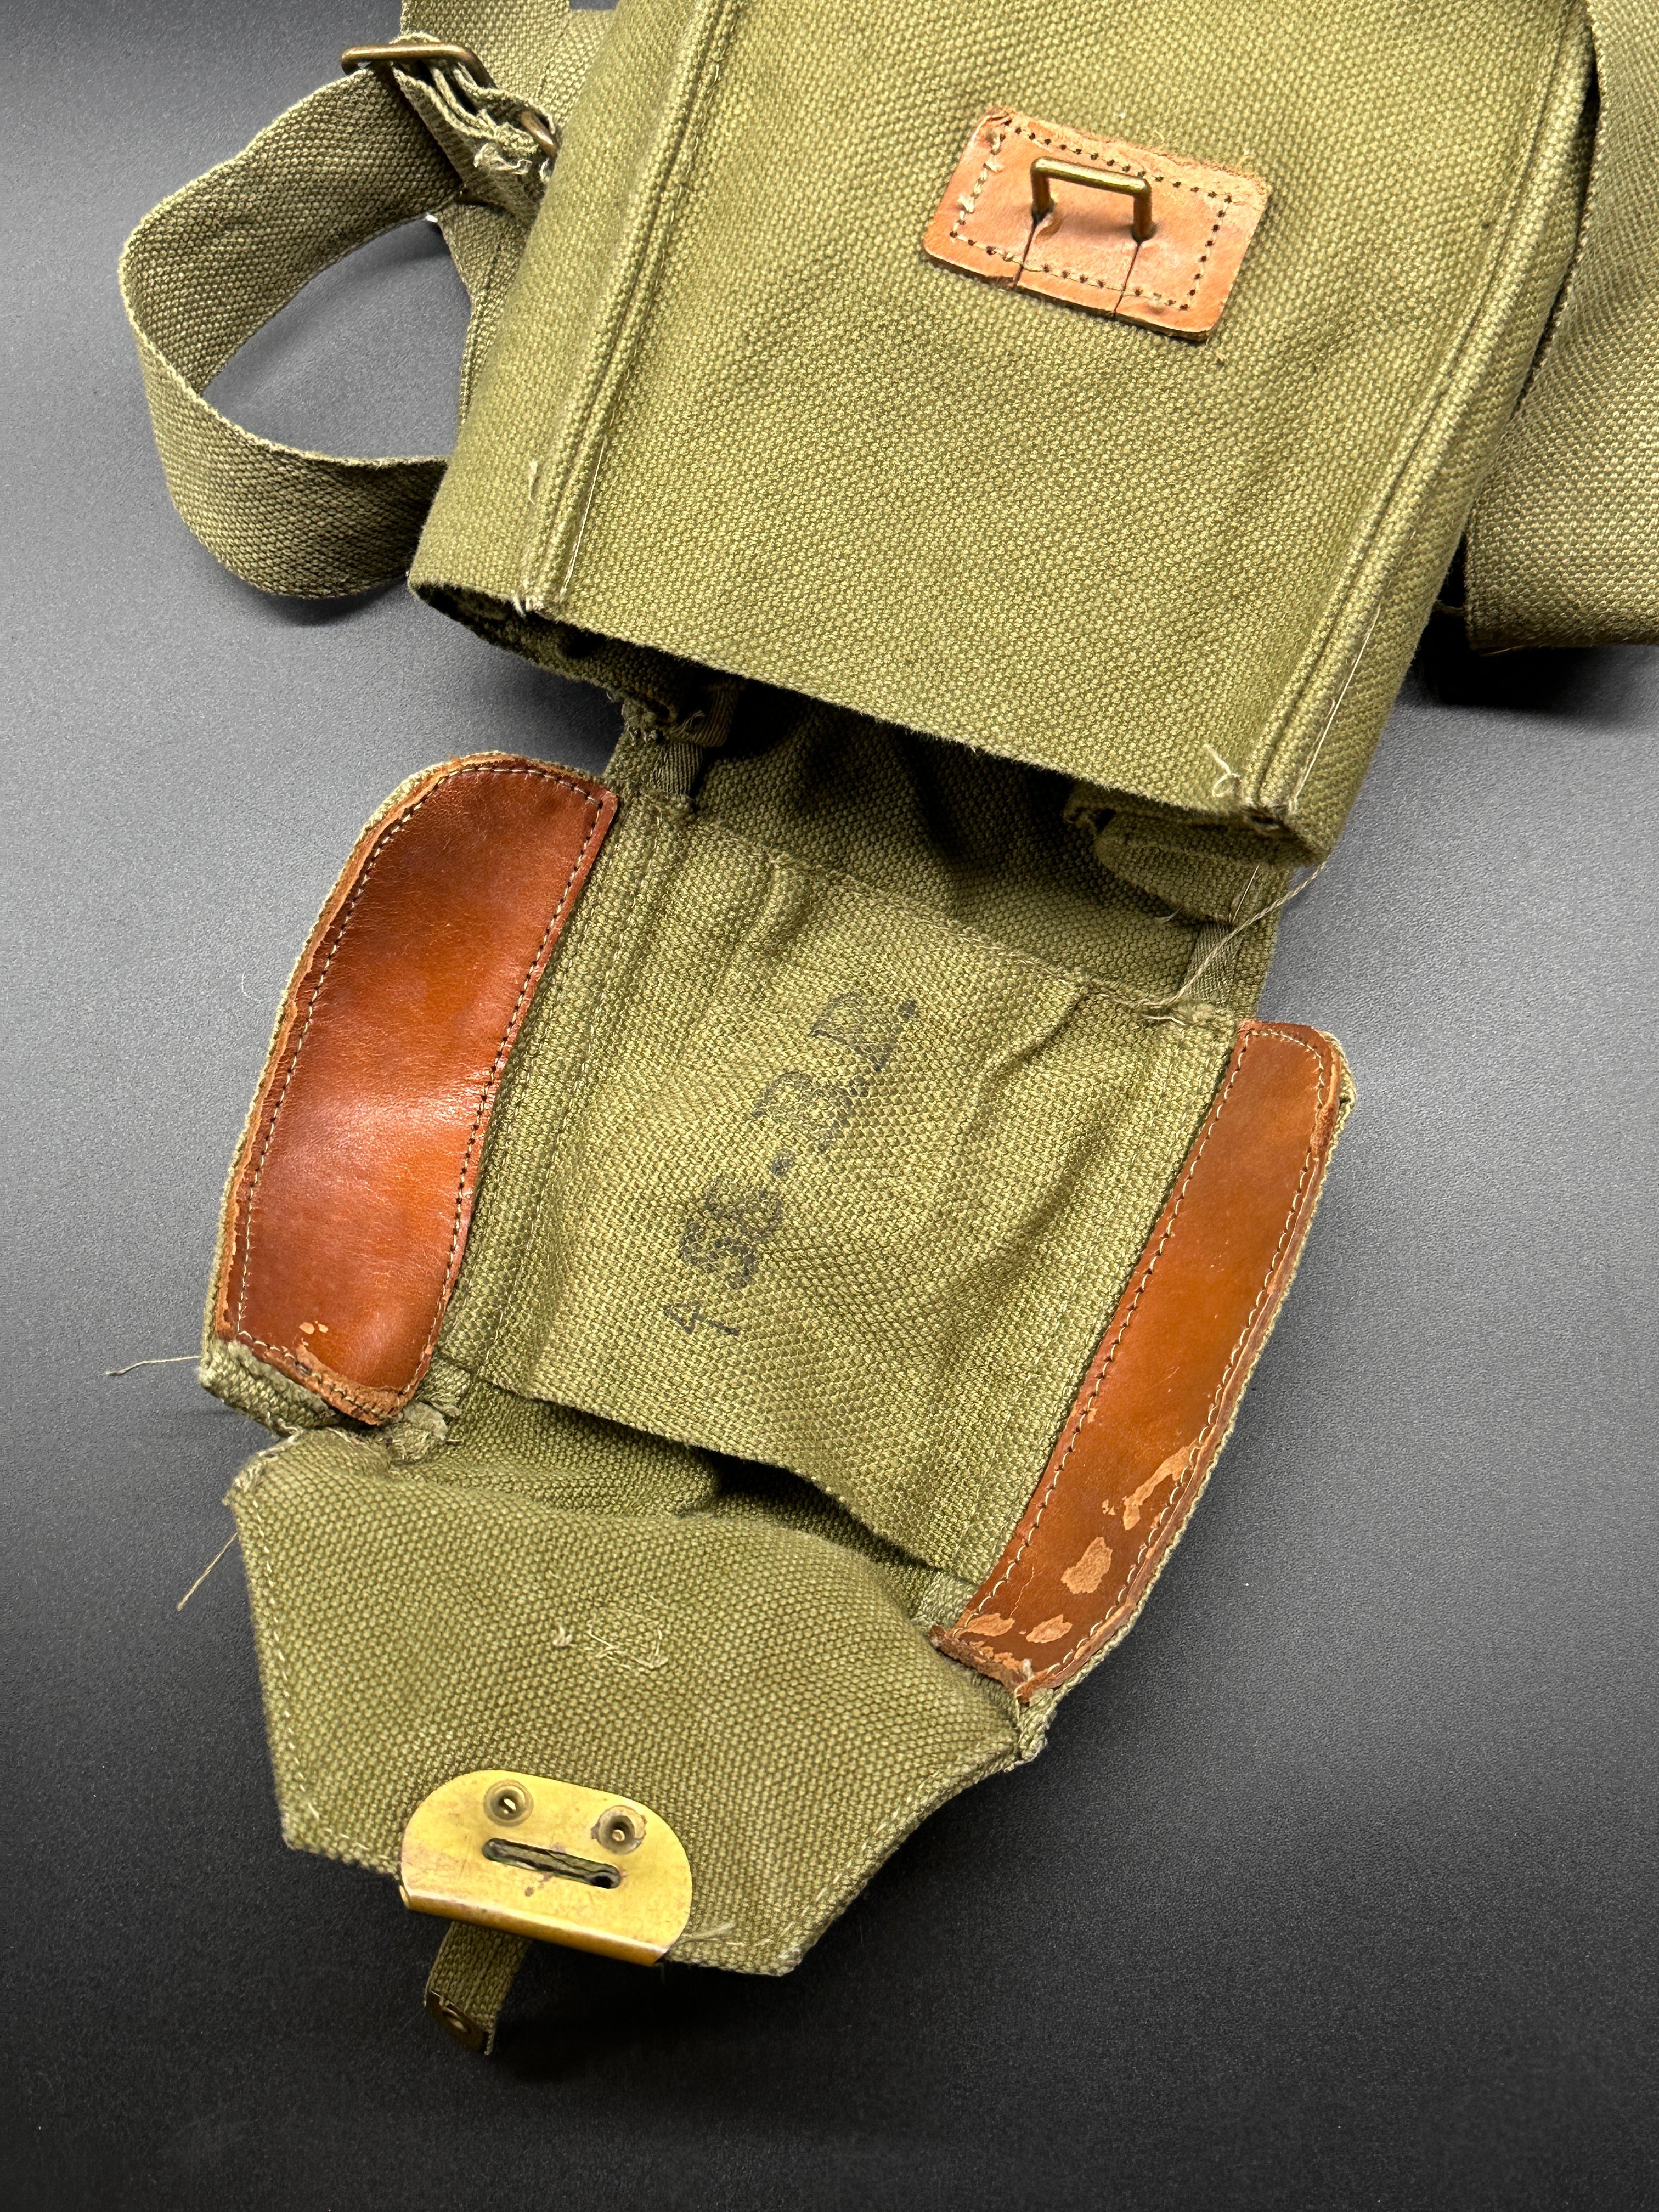 Vintage Gas Mask and Canvas Bag